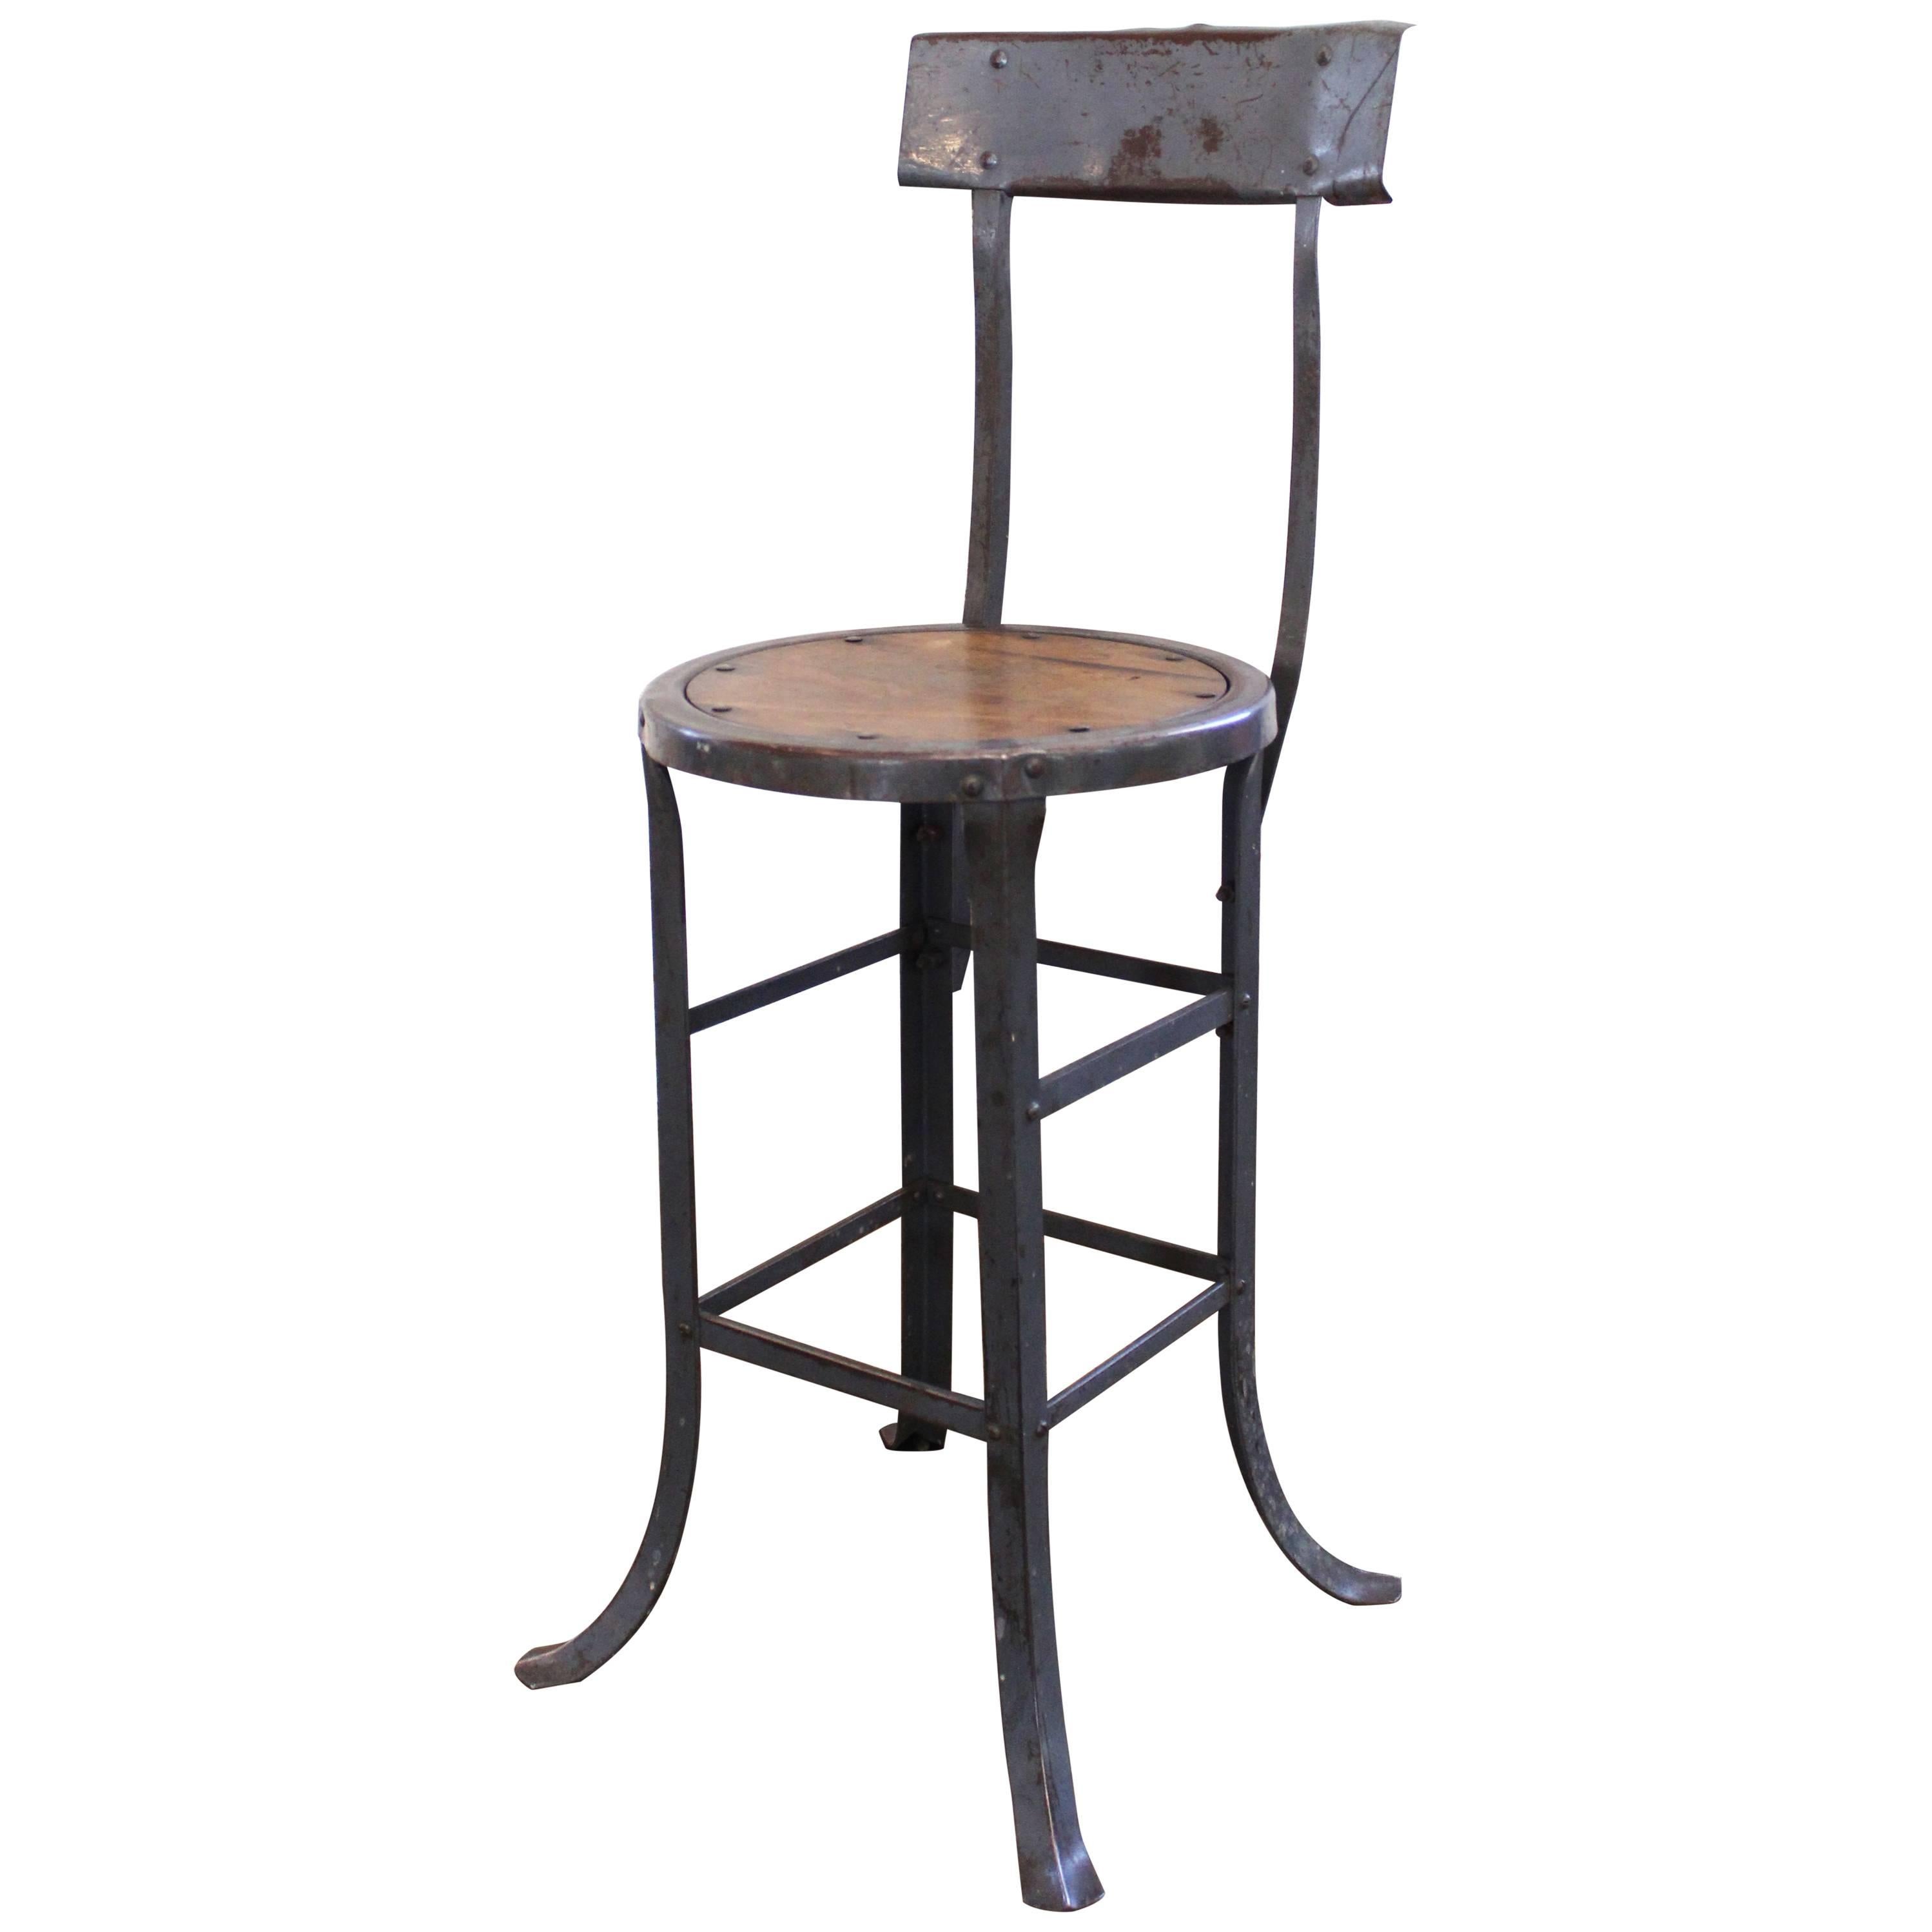 Vintage Industrial Rustic Wood and Metal Bar, Kitchen Island Stool with Back